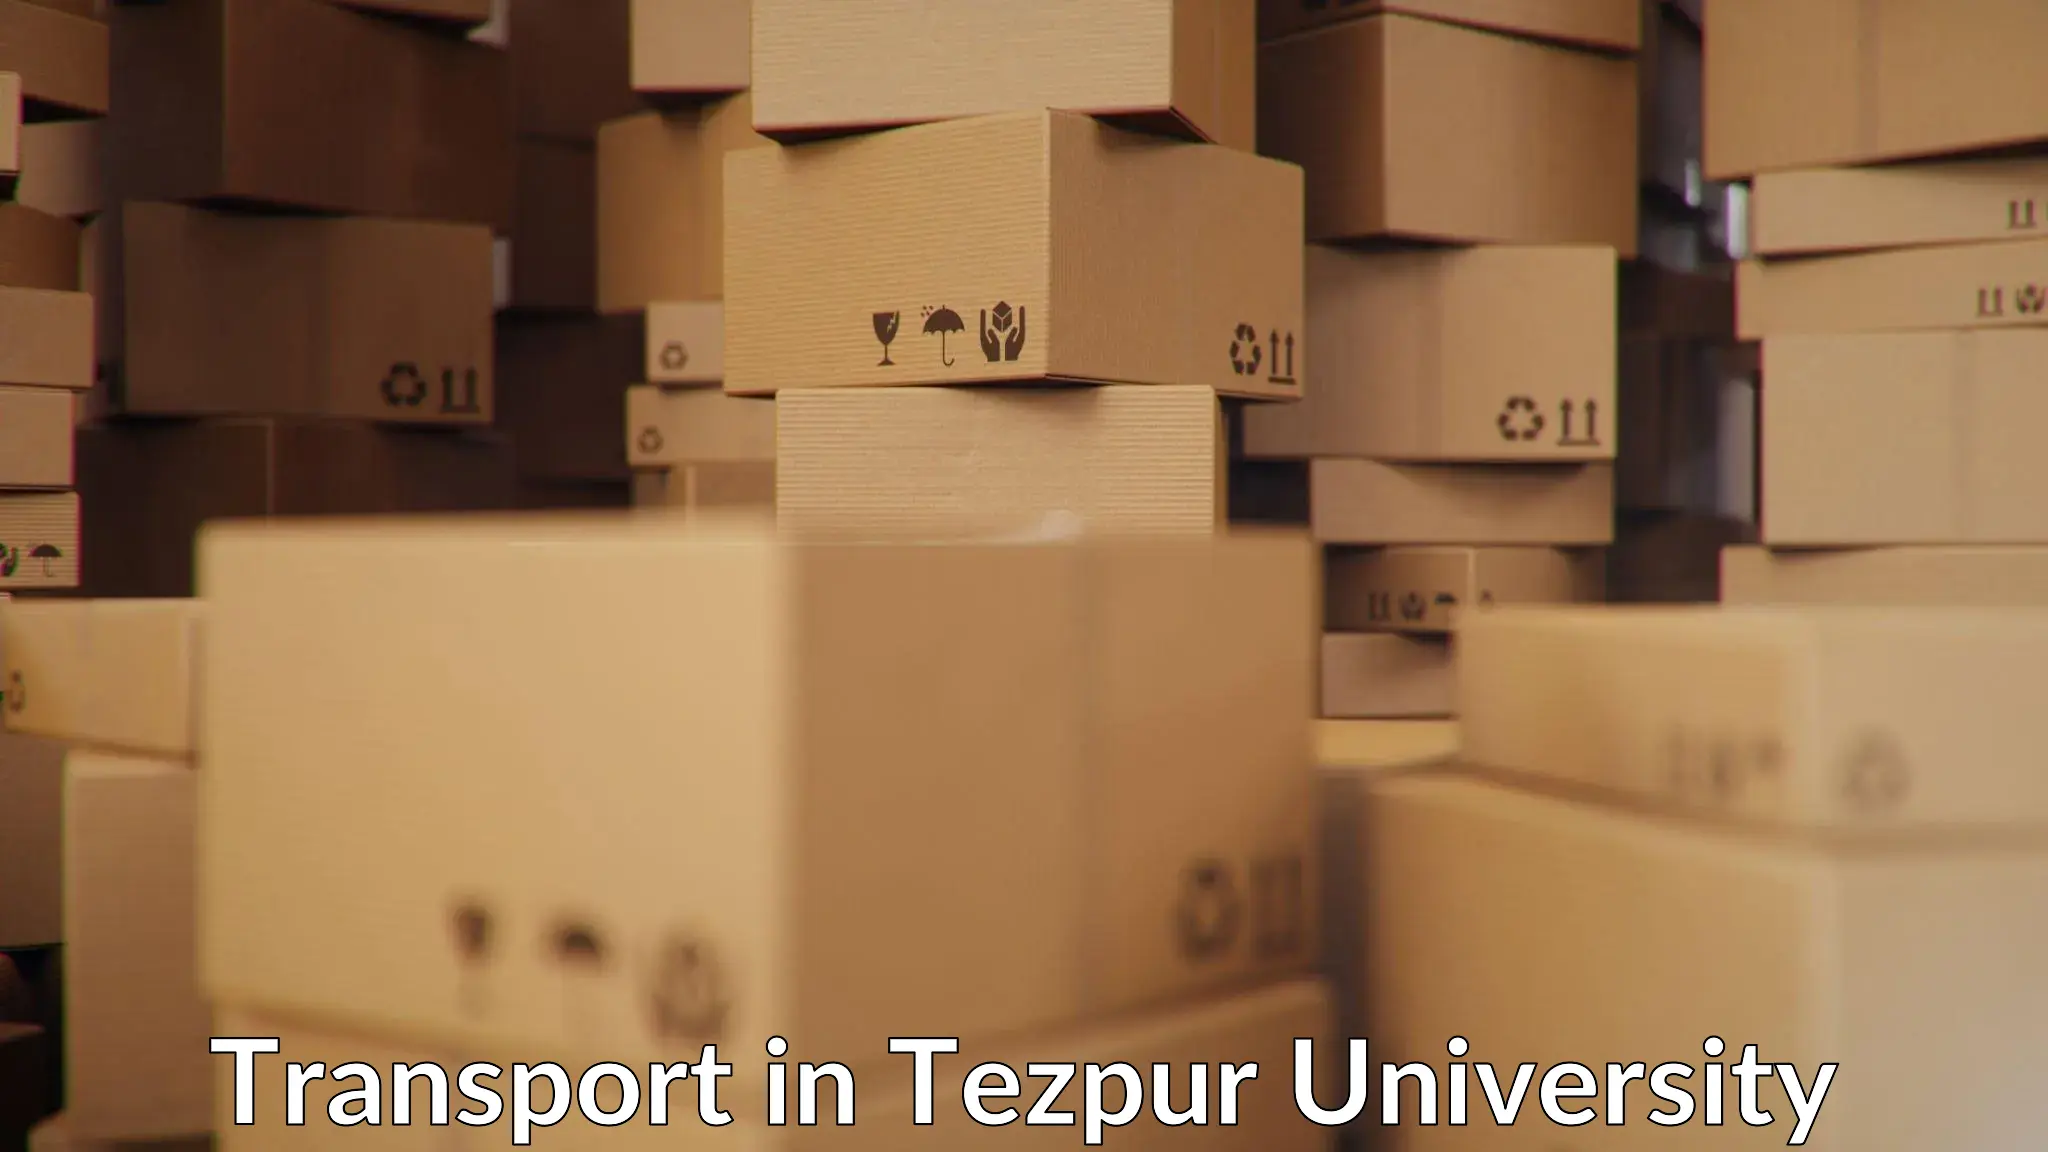 Road transport services in Tezpur University